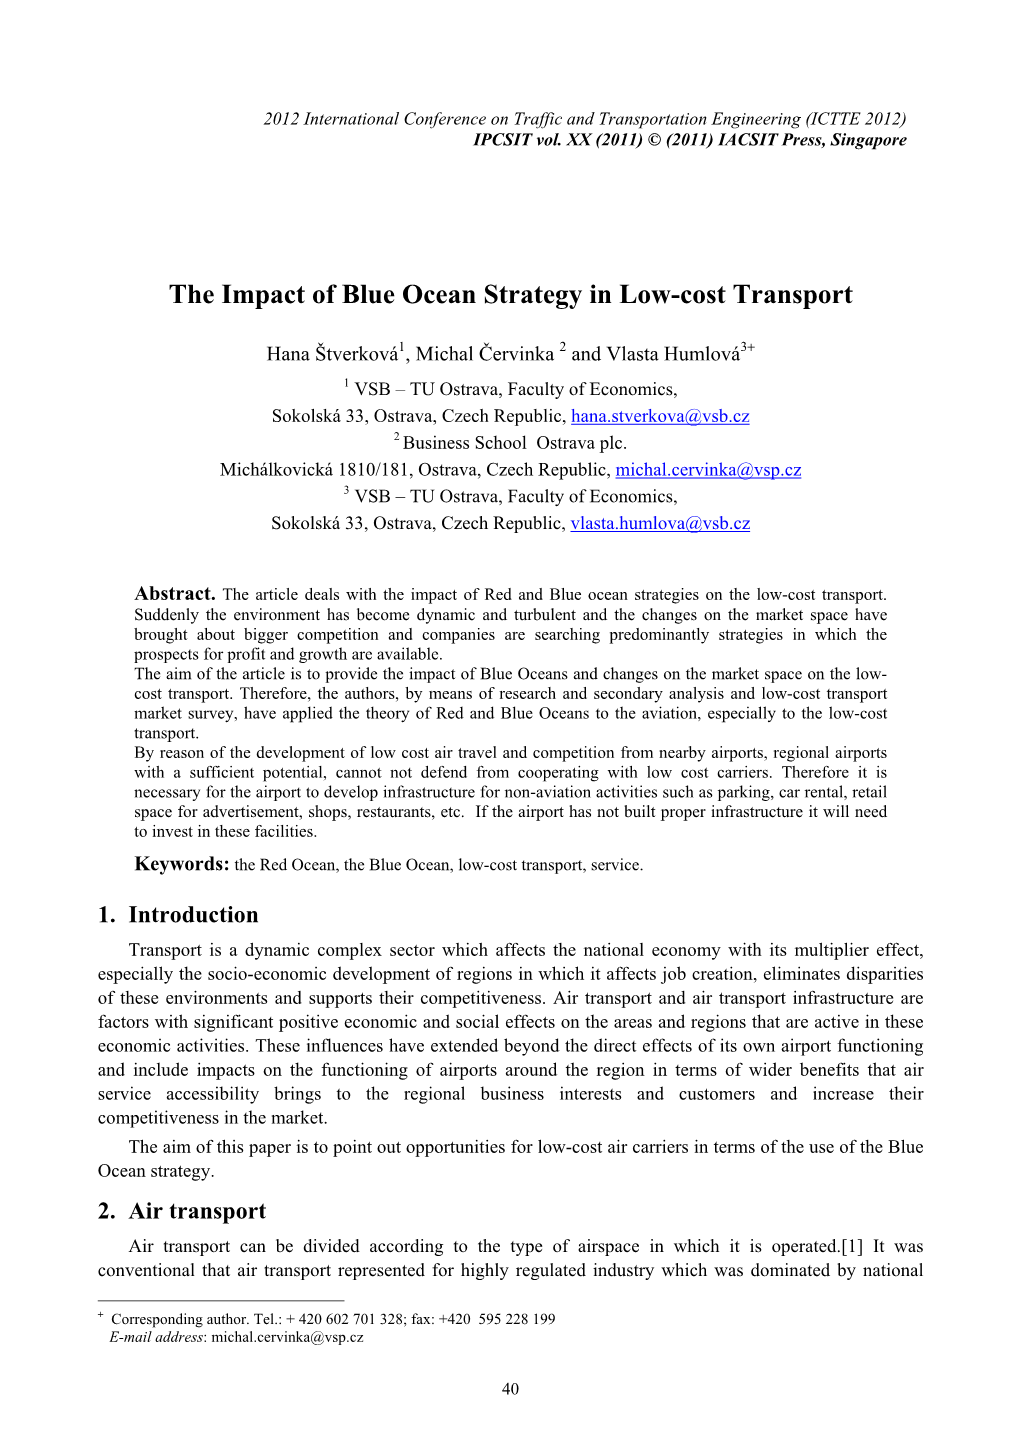 The Impact of Blue Ocean Strategy in Low-Cost Transport